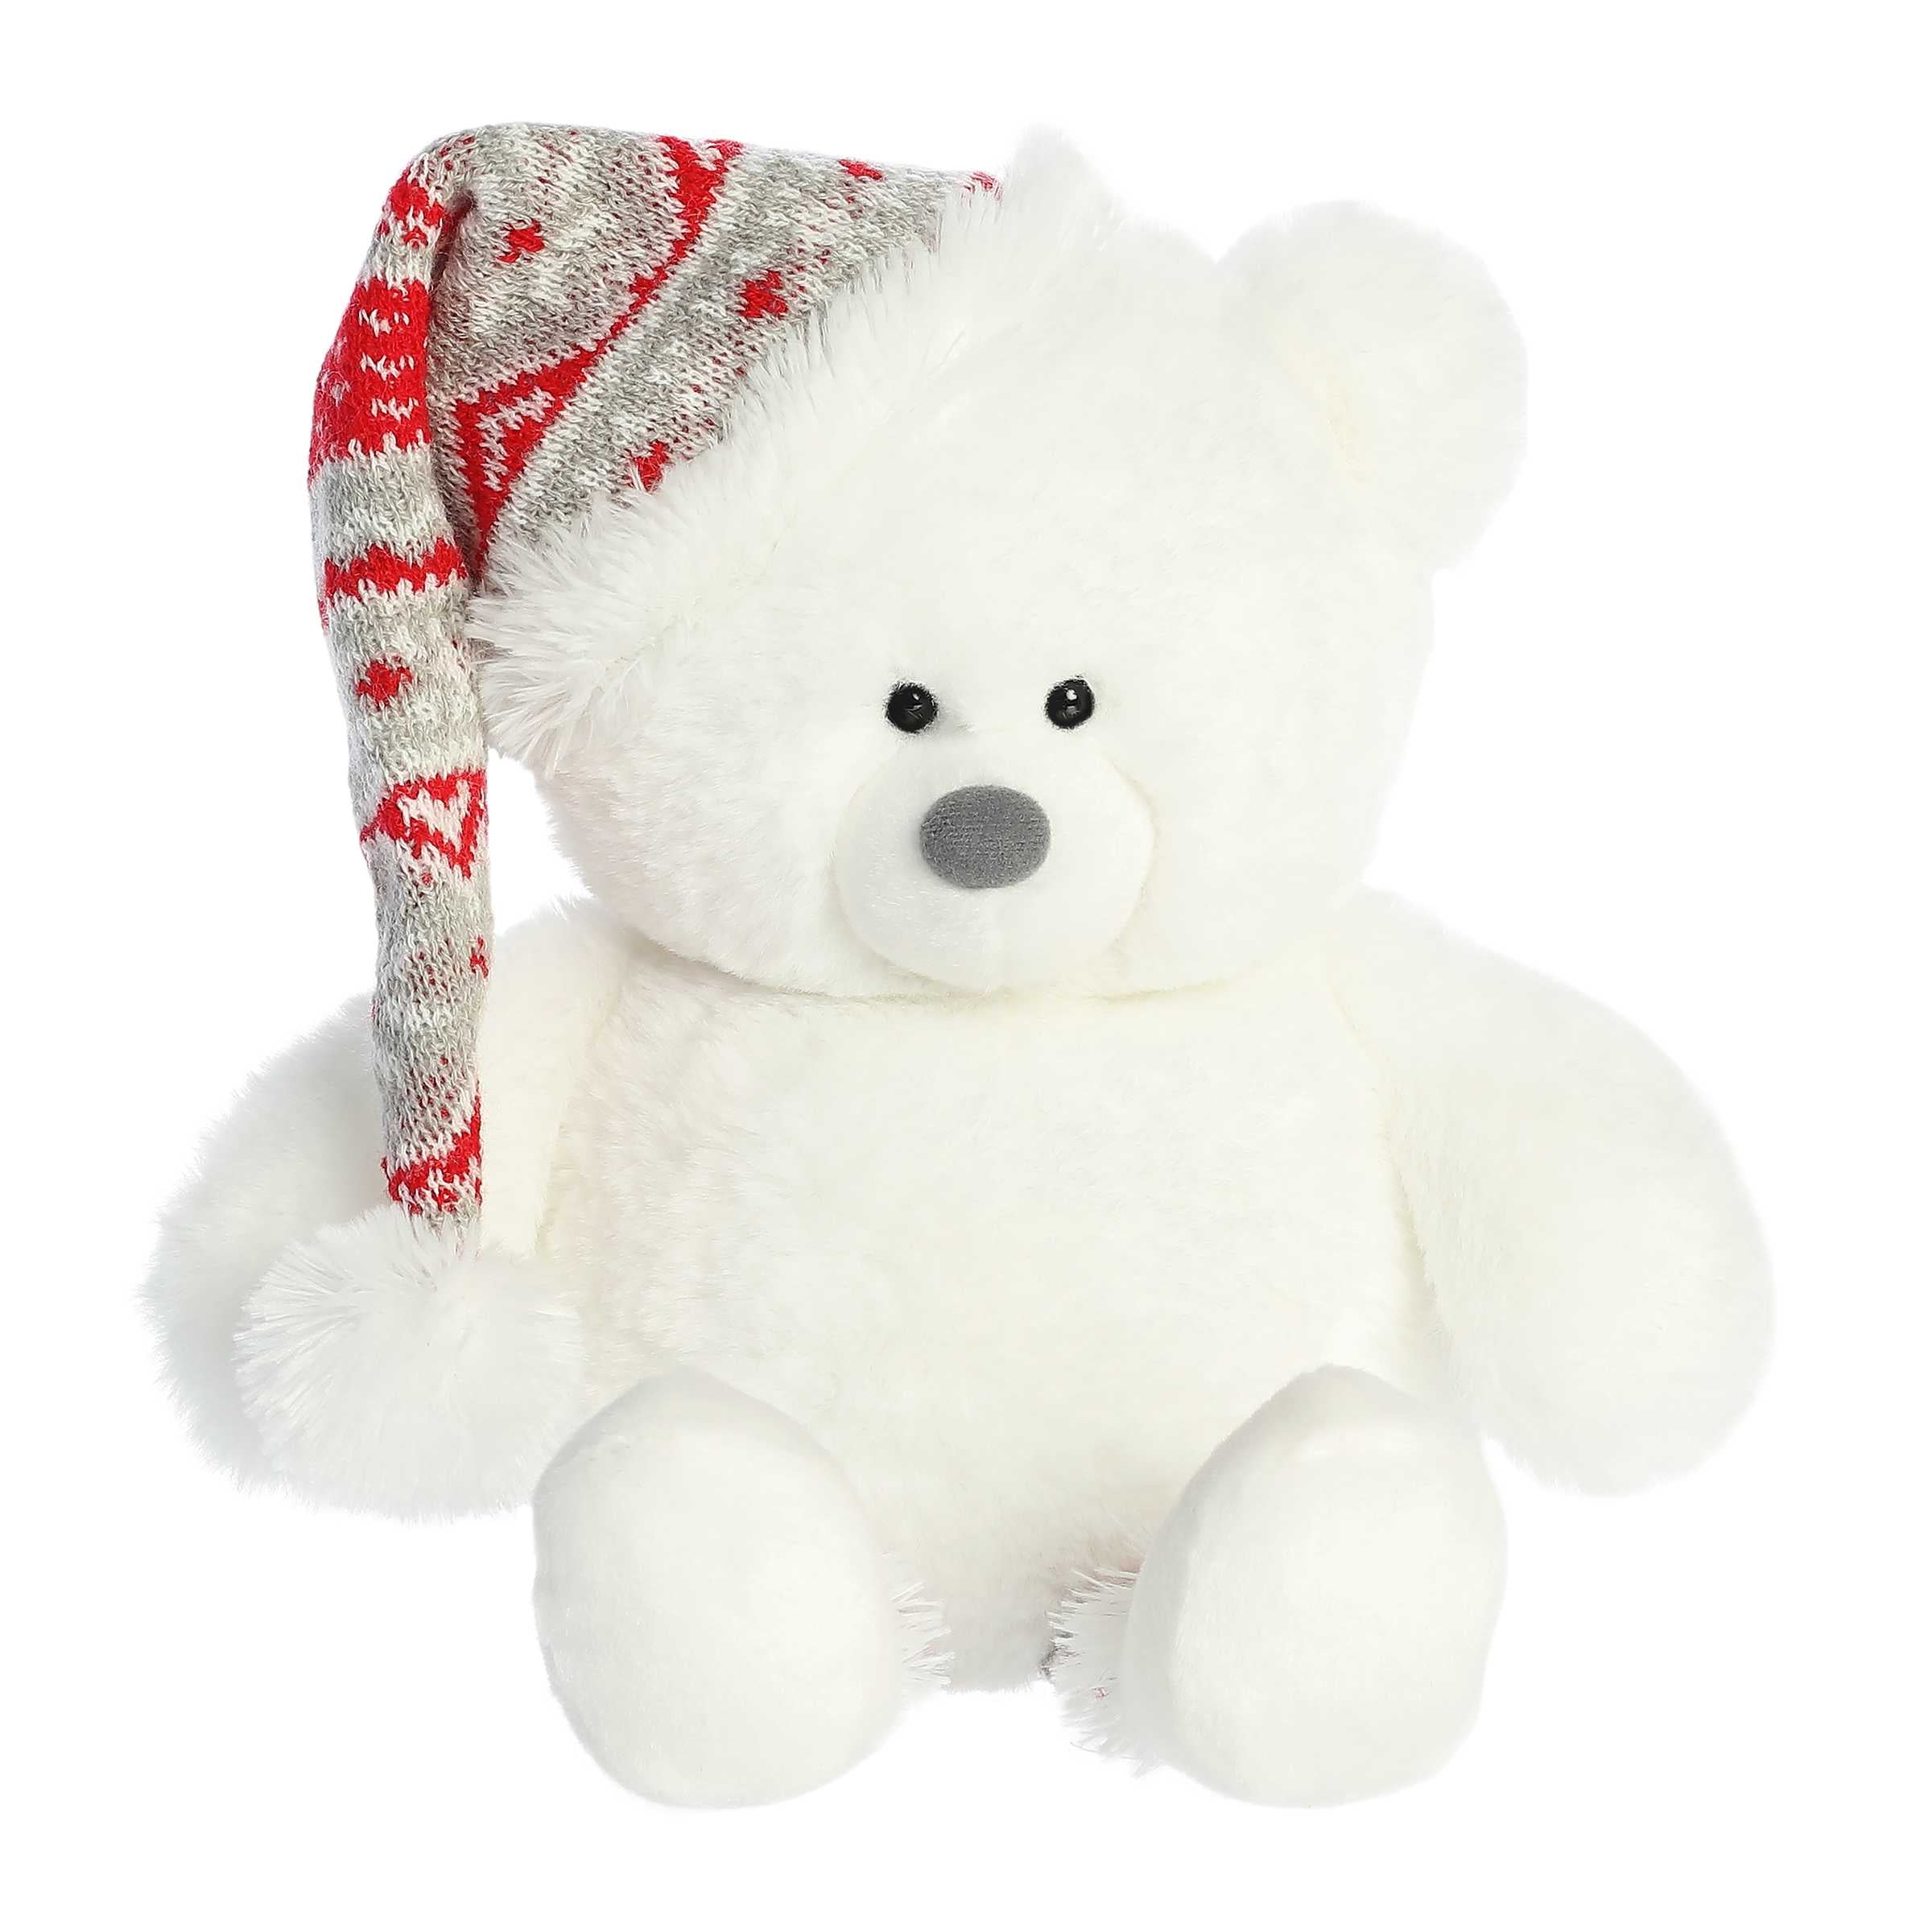 Cuddly white teddy bear with red and gray knit sweater pattern on the legs and a matching non-detachable knit Santa hat